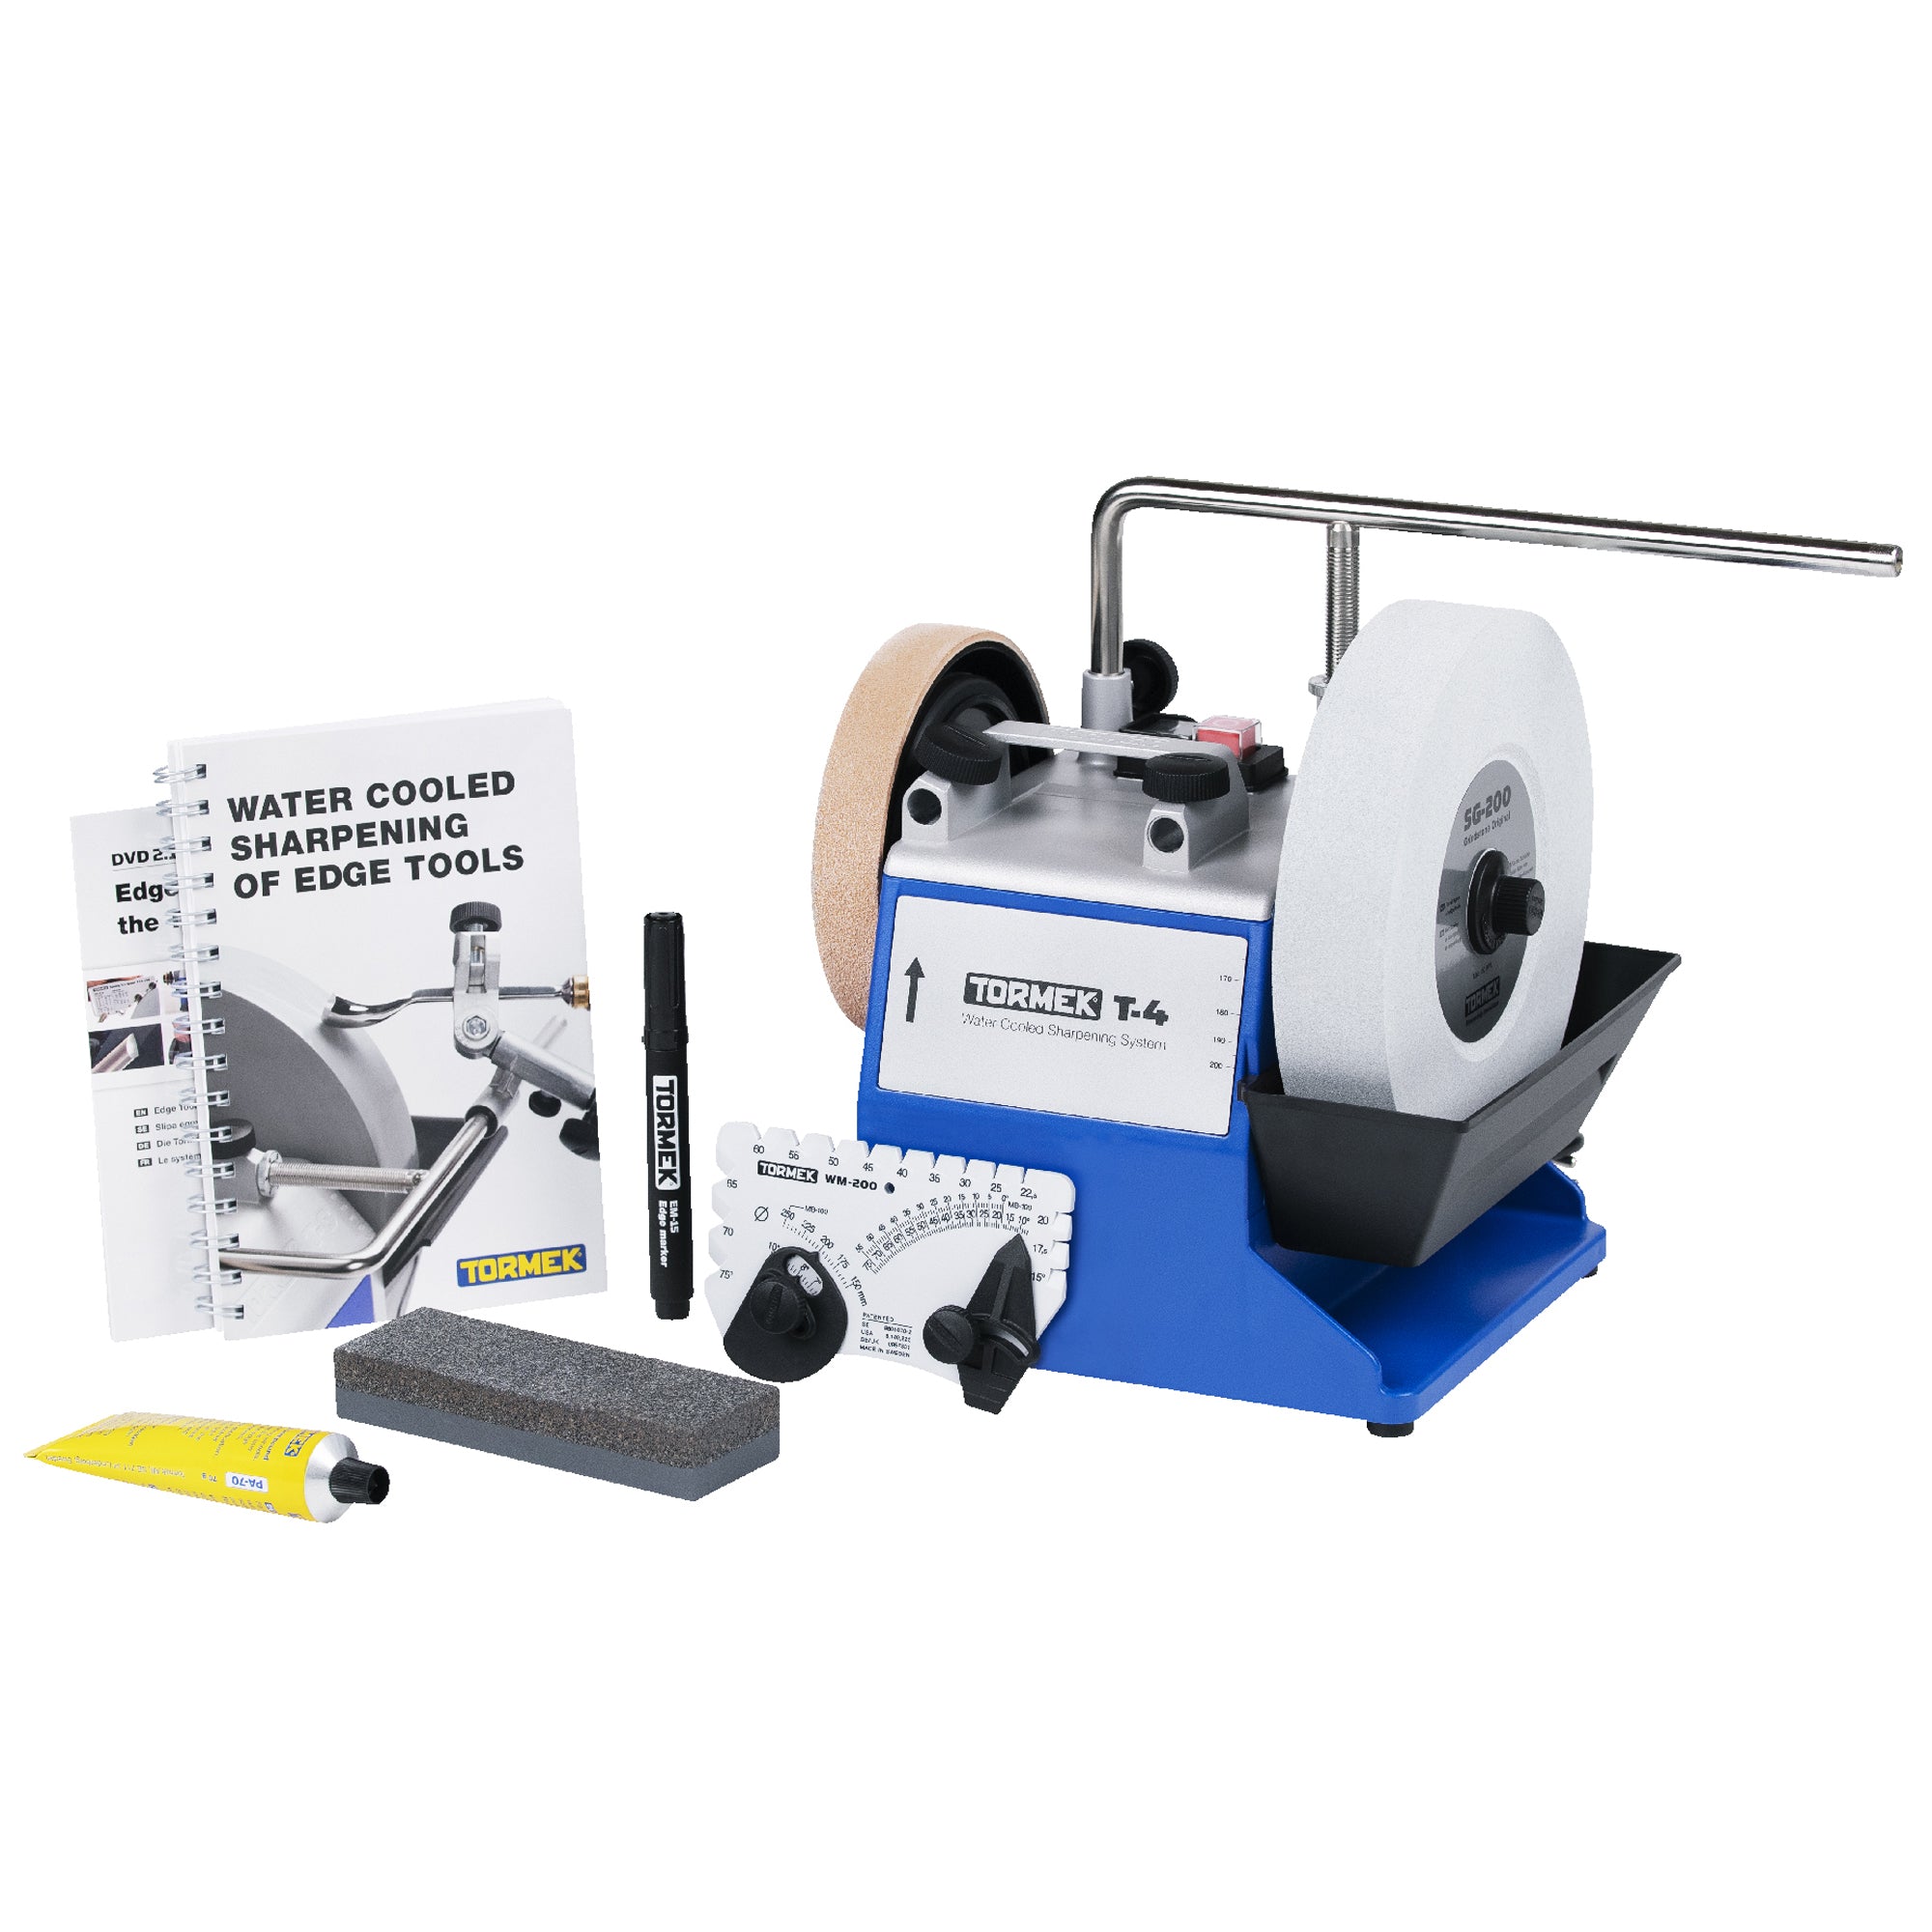 T-4 Water Cooled Tool Sharpening System by Tormek